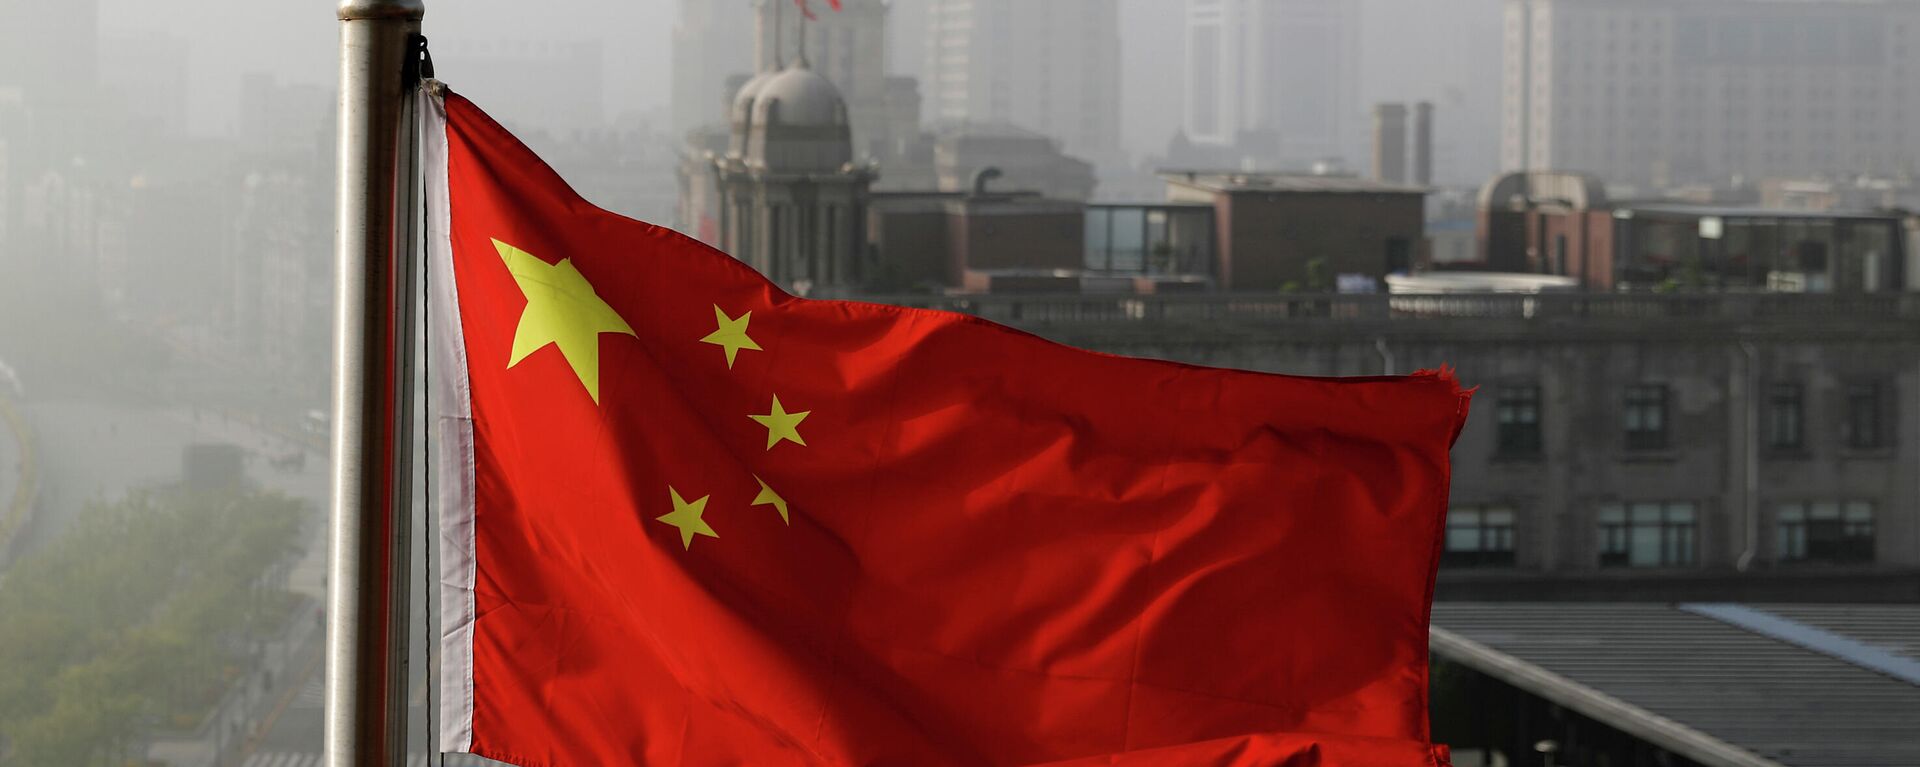 In this April 14, 2016 file photo, a Chinese national flag flutters against the office buildings in Shanghai, China.  - Sputnik International, 1920, 24.05.2022